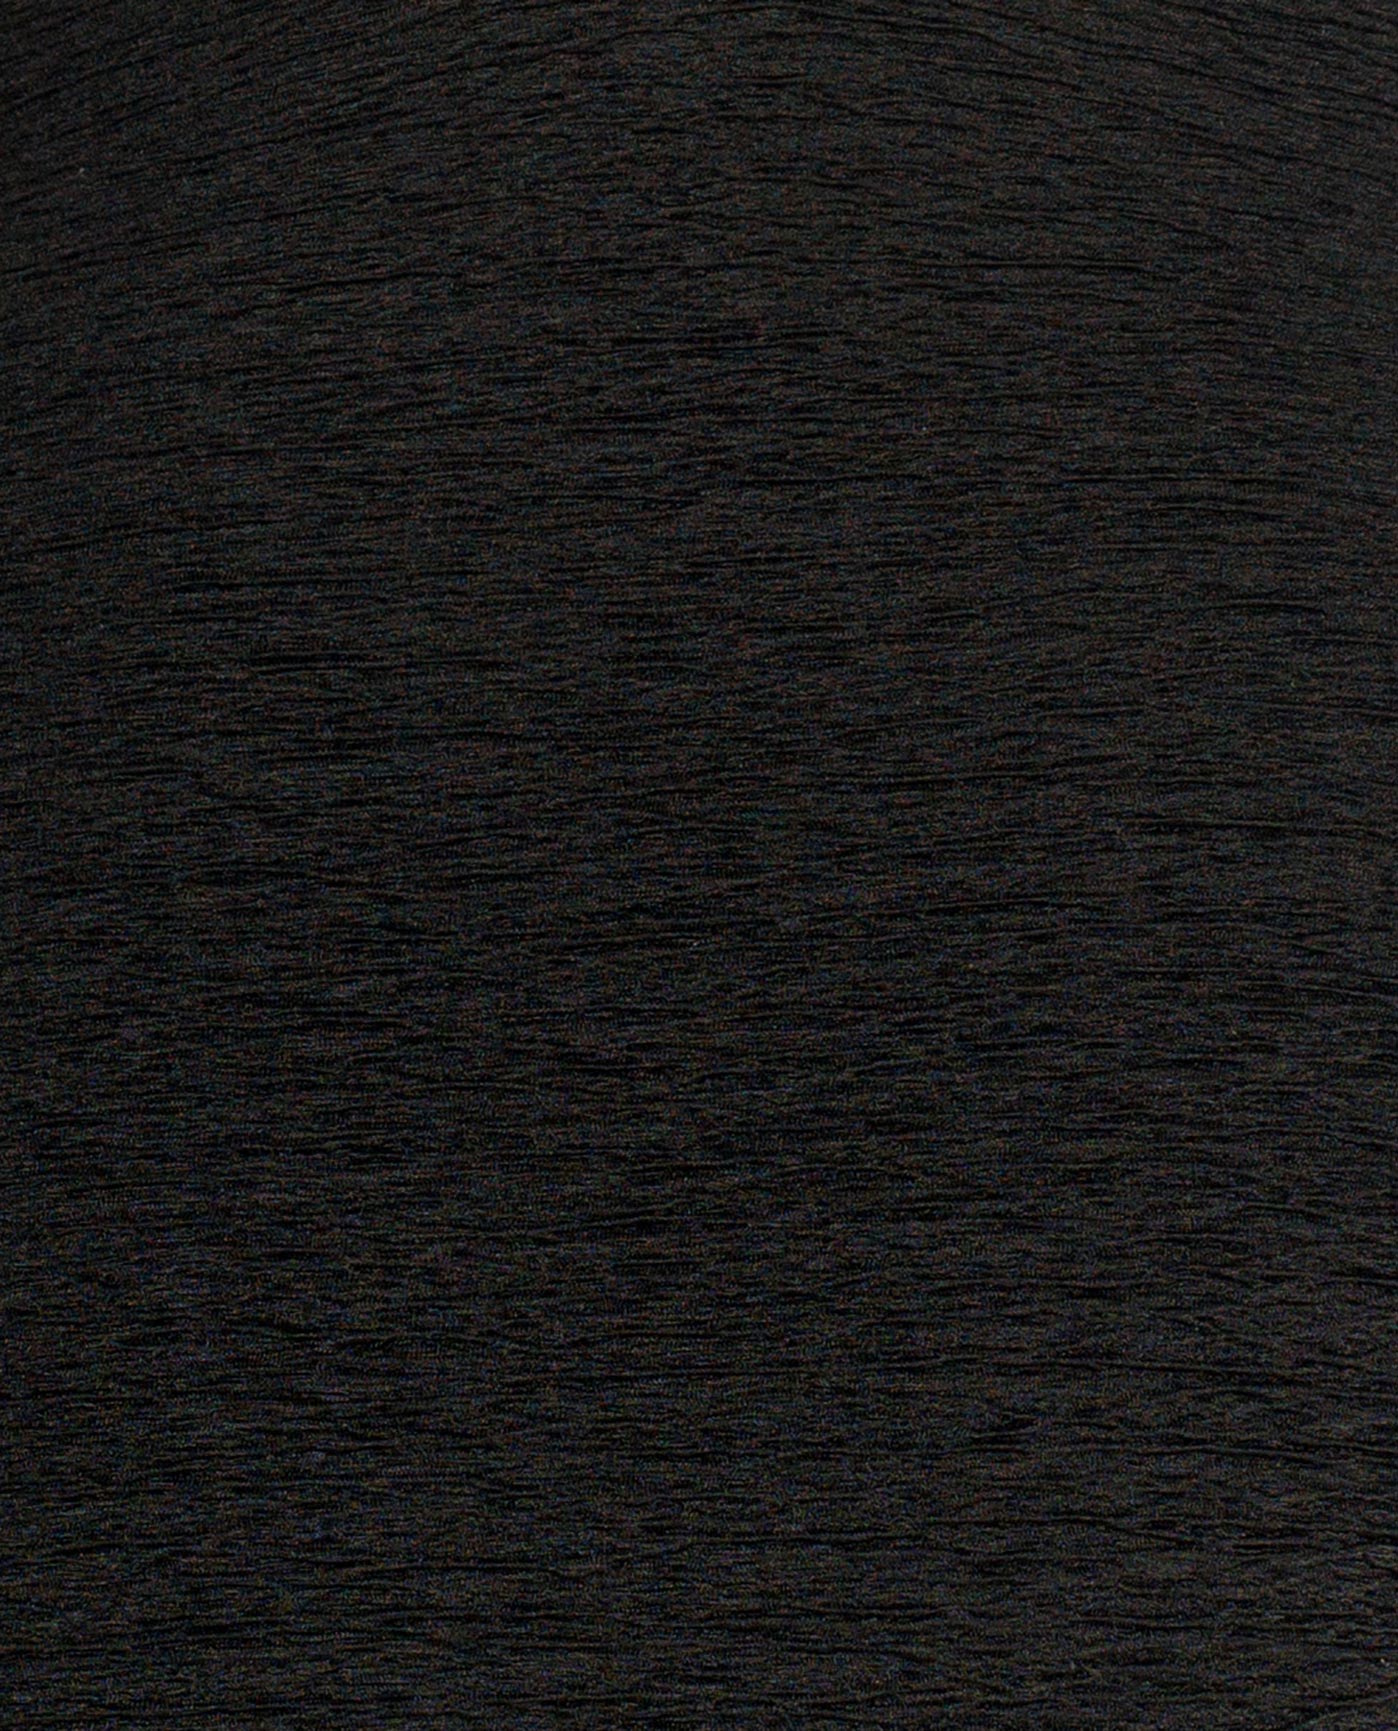 FABRIC SWATCH VIEW OF CHLORINE RESISTANT KRINKLE TEXTURED SOLID TWIST FRONT ONE PIECE | KRINKLE BLACK 2023